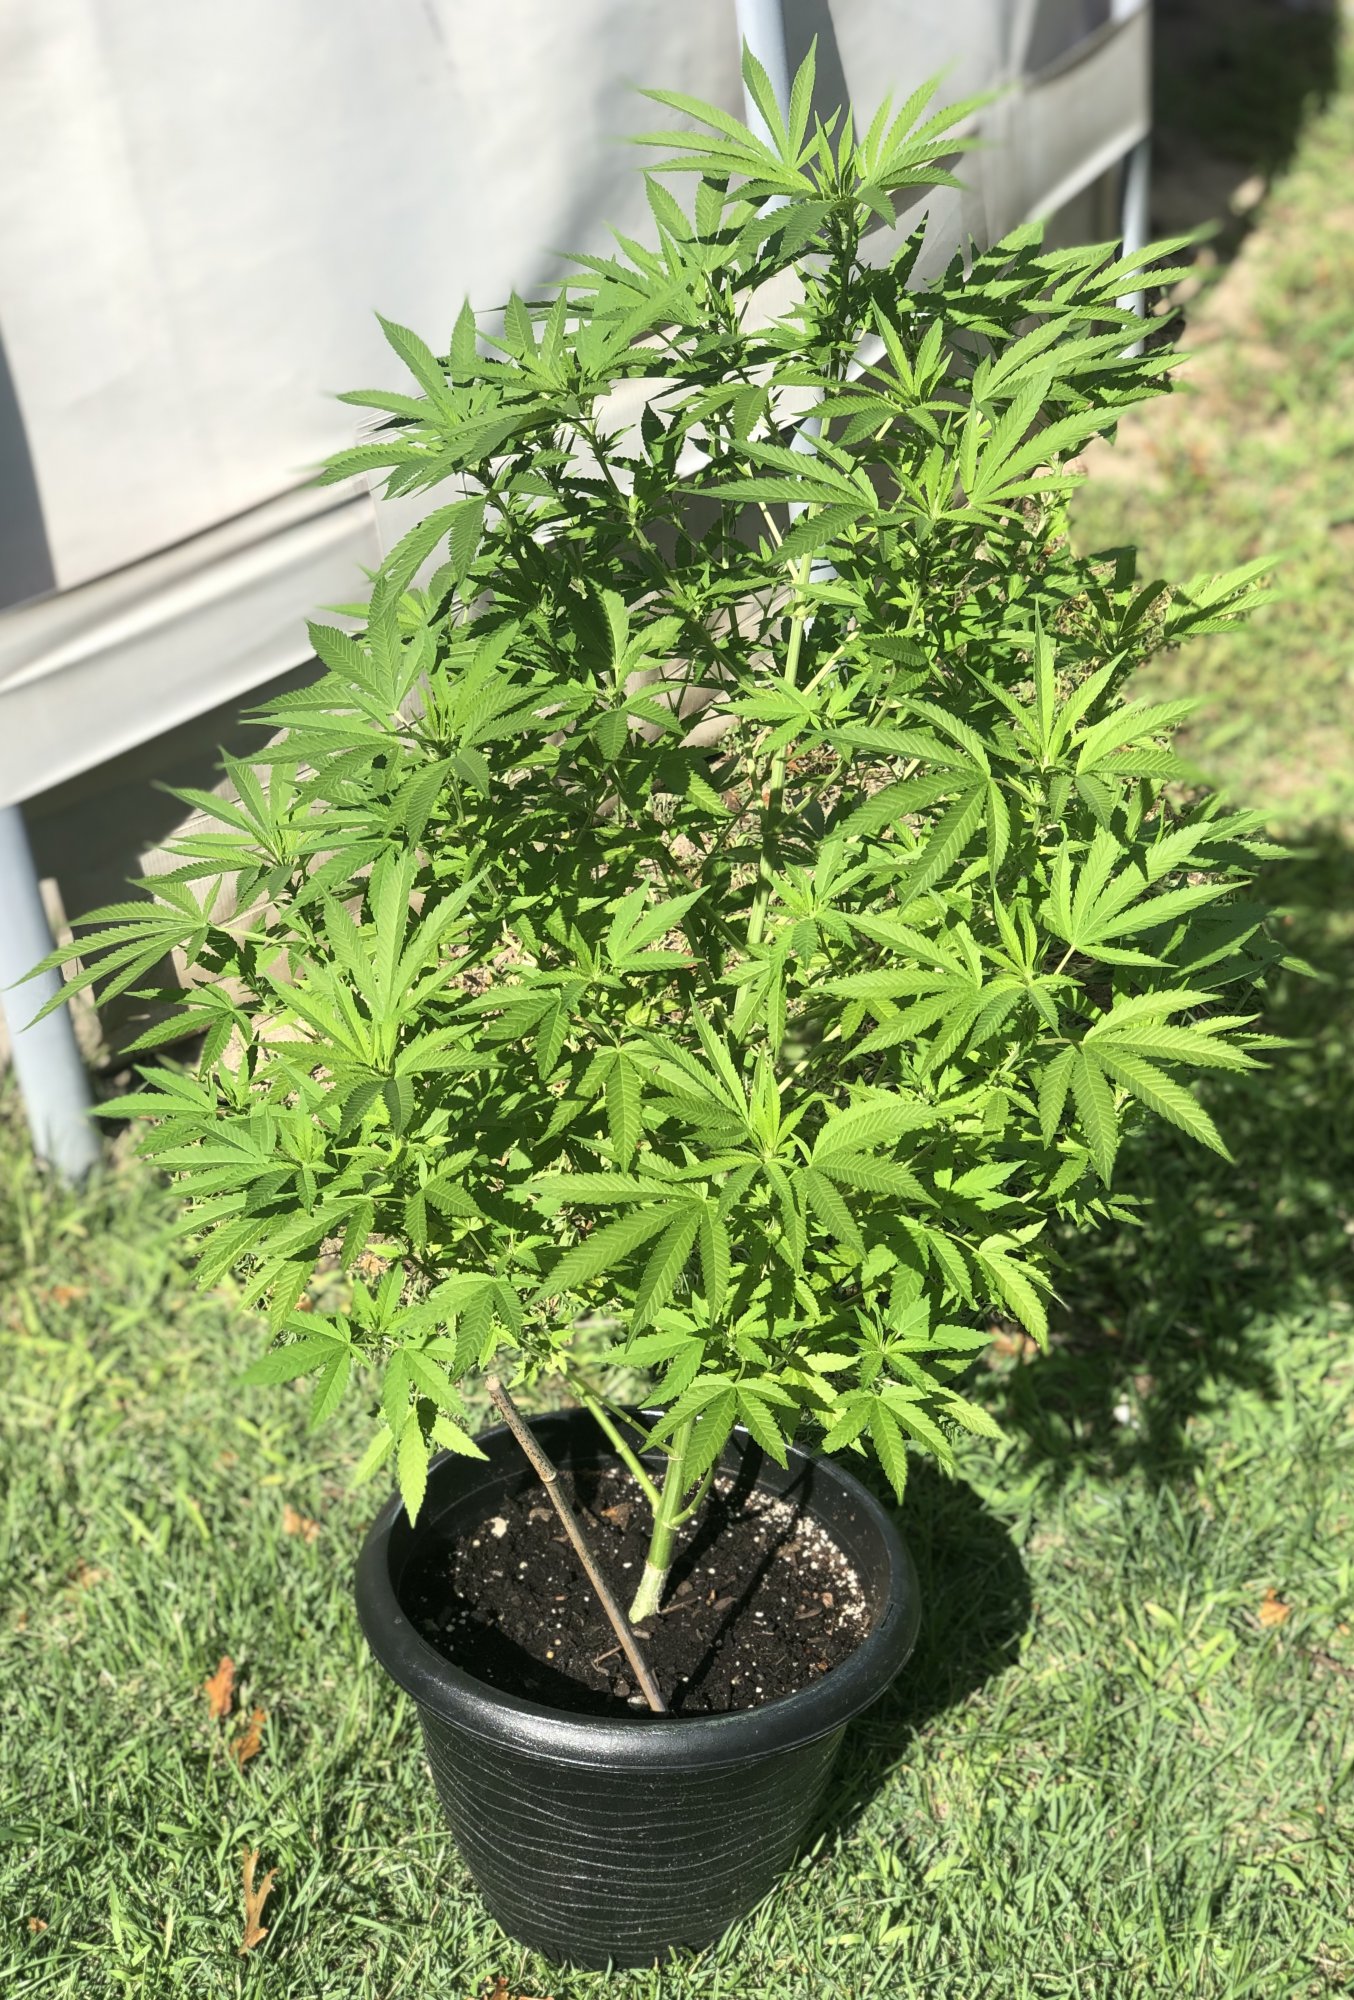 First time outdoor still learning any tips or advise greatly appreciated 6